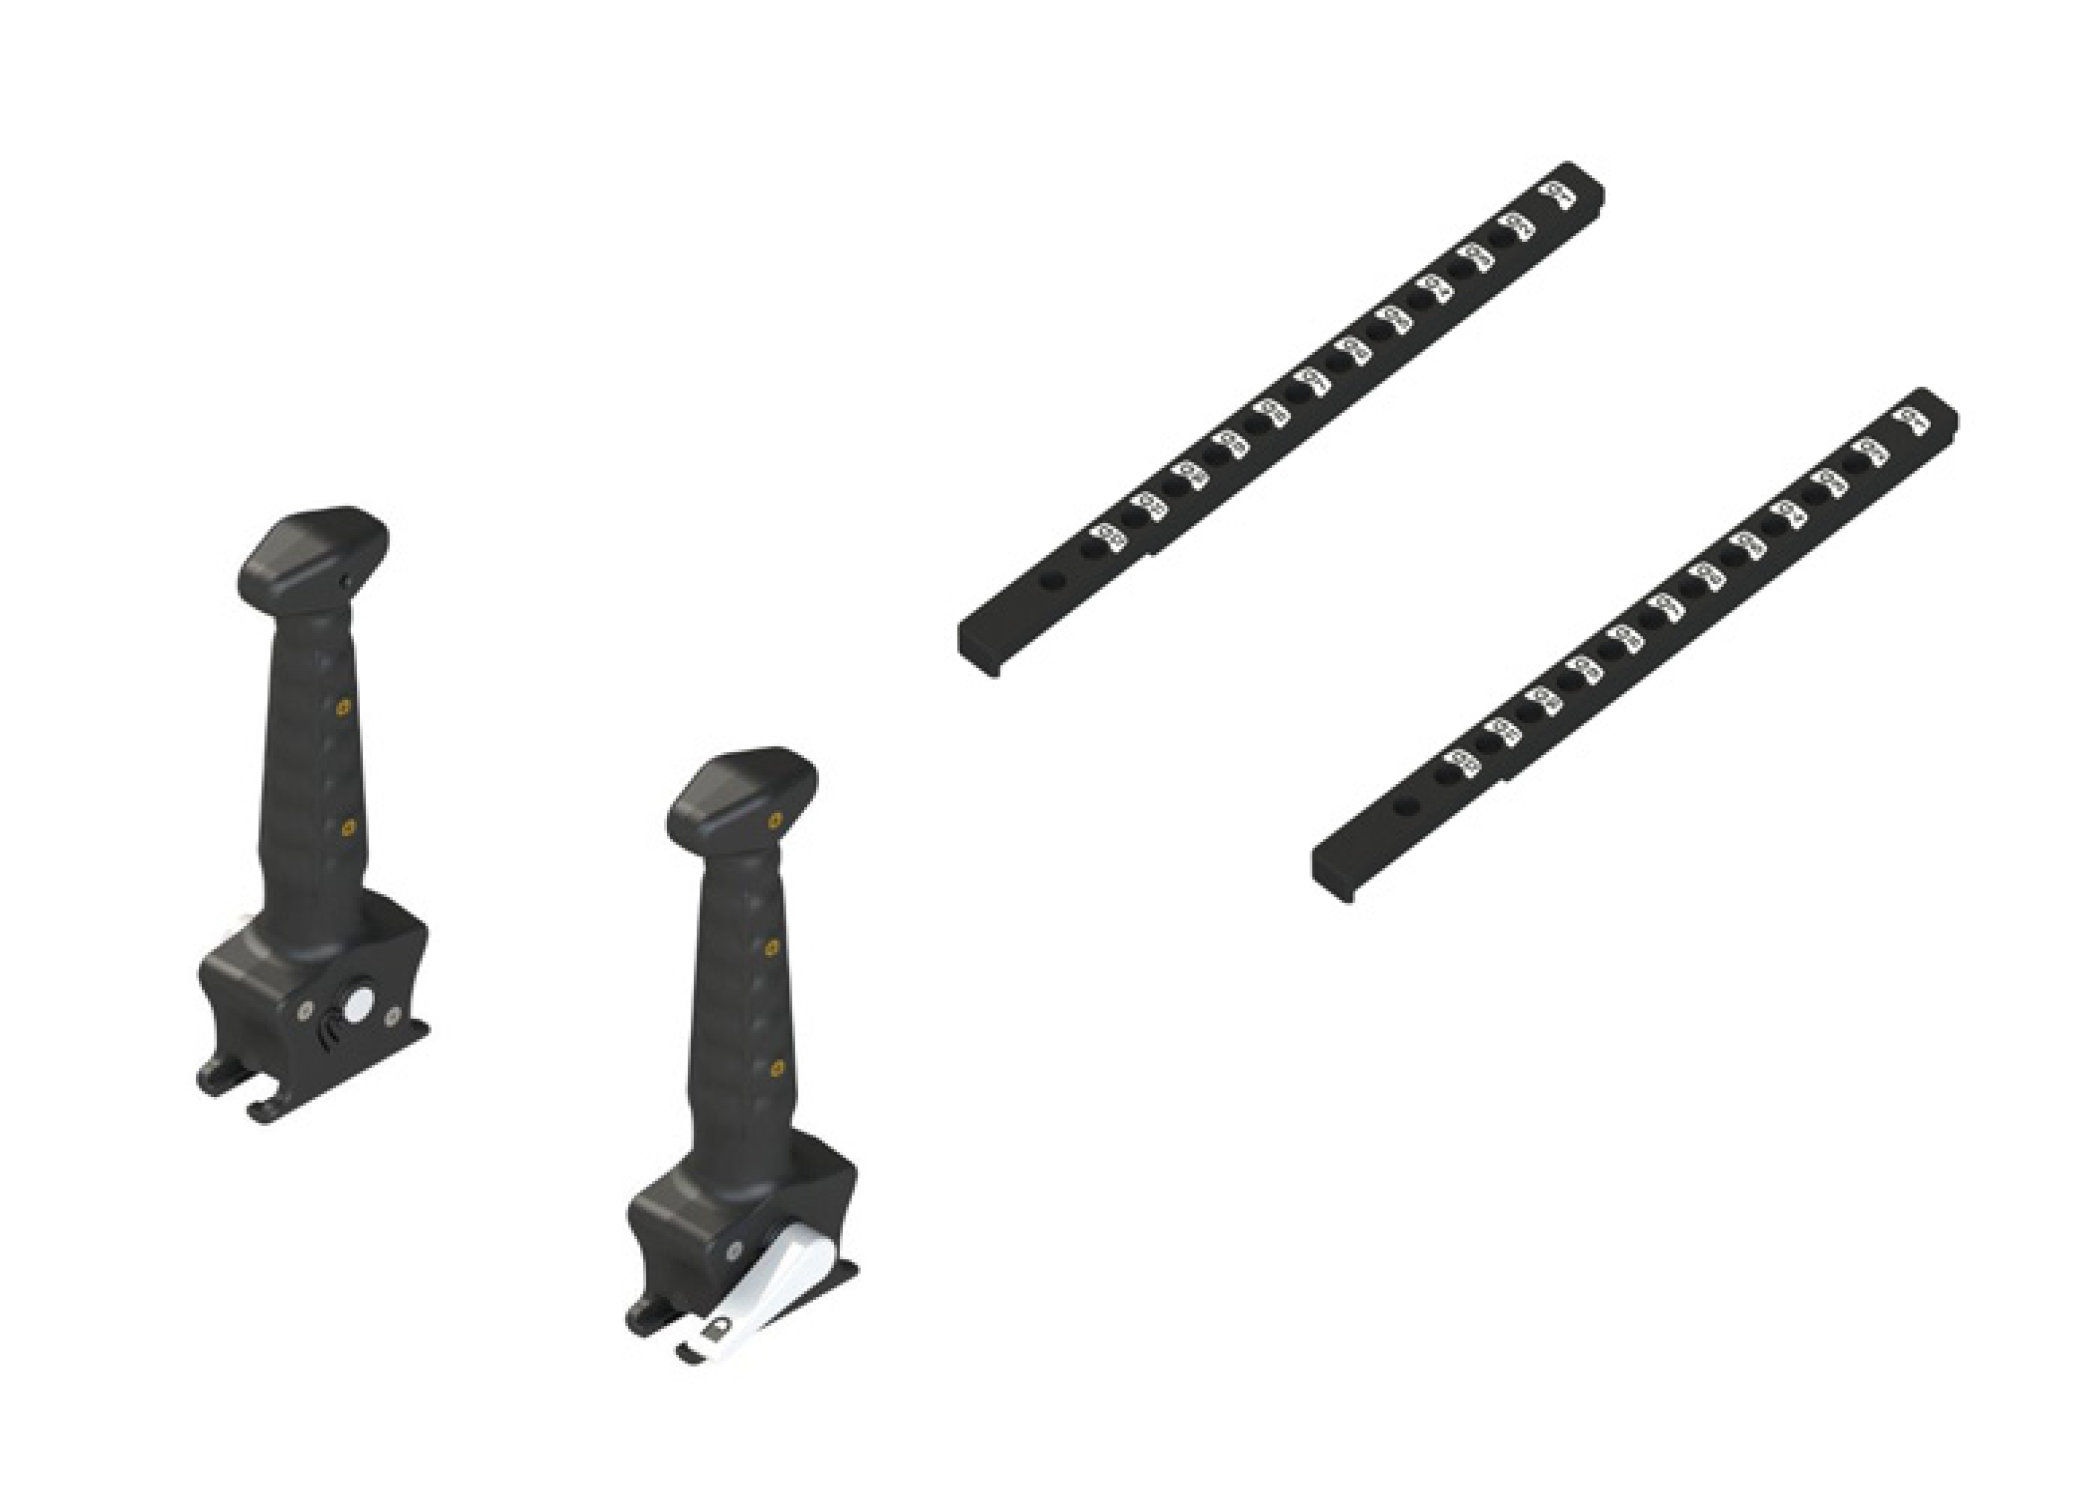 Individual Hand Grips and Tracks